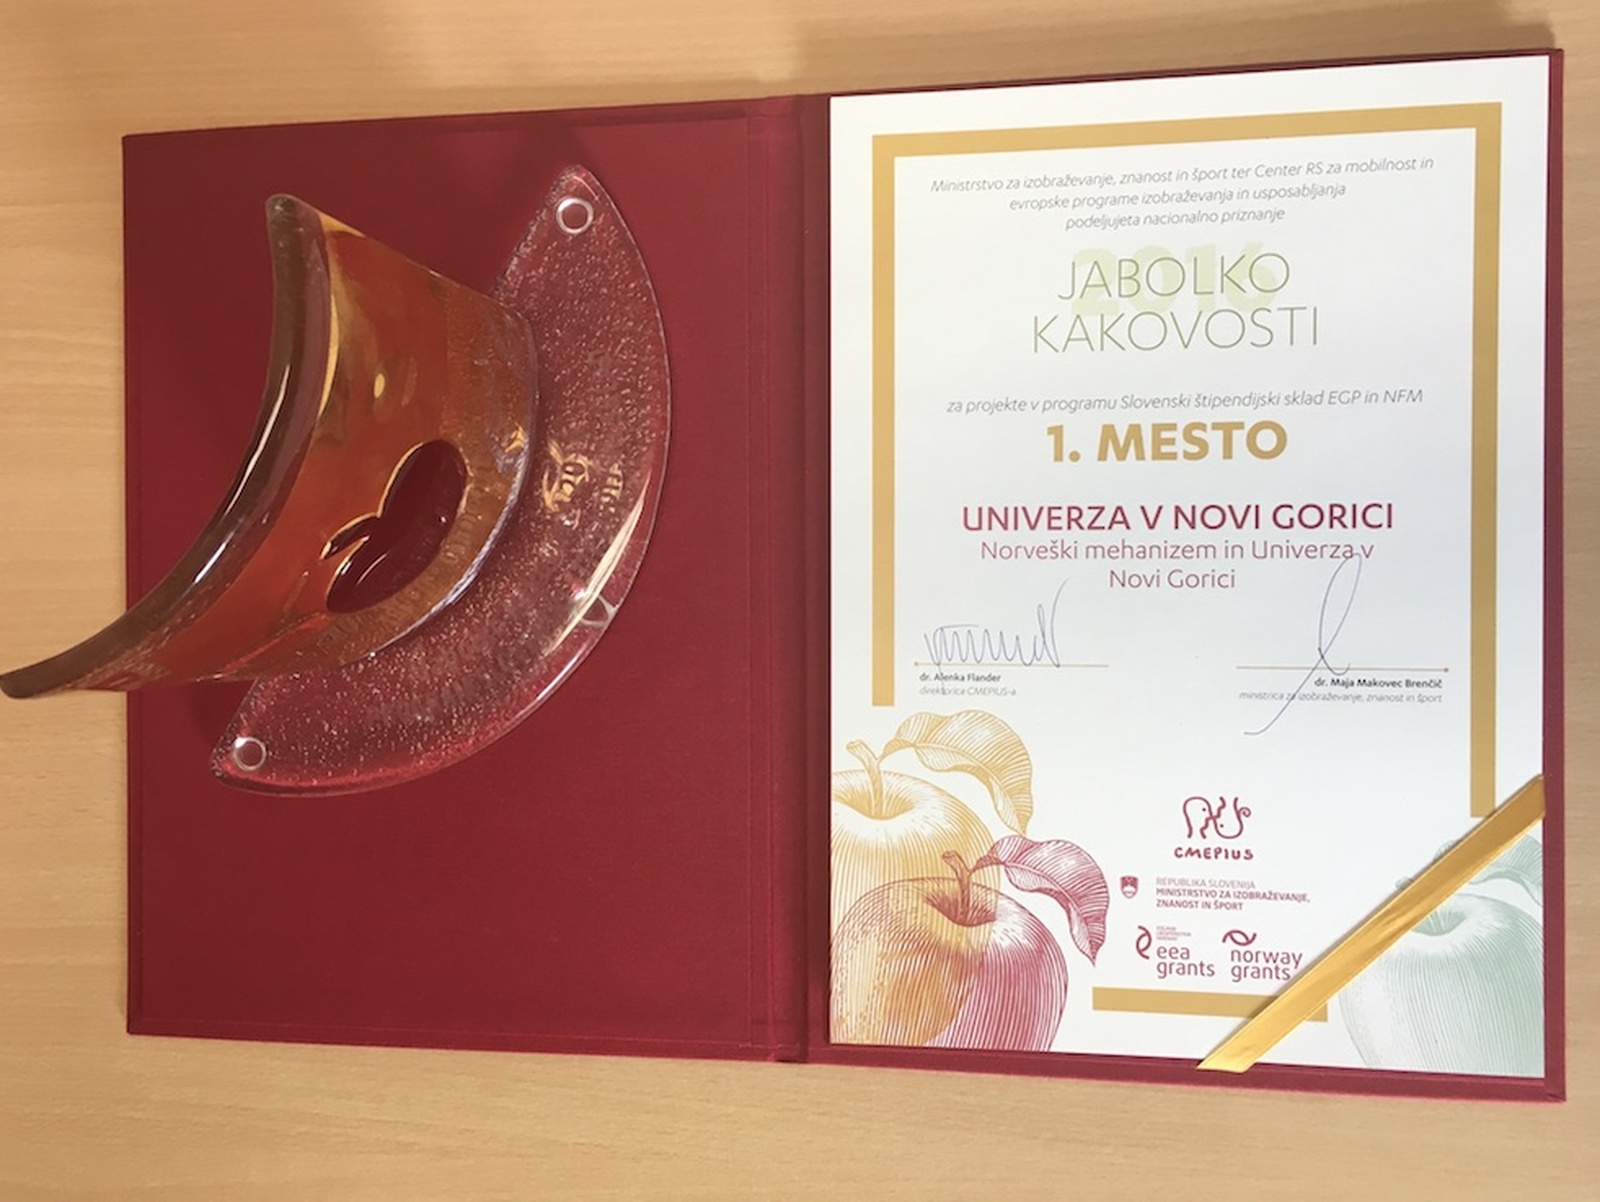 The University of Nova Gorica received the national award “The apple of quality 2016”